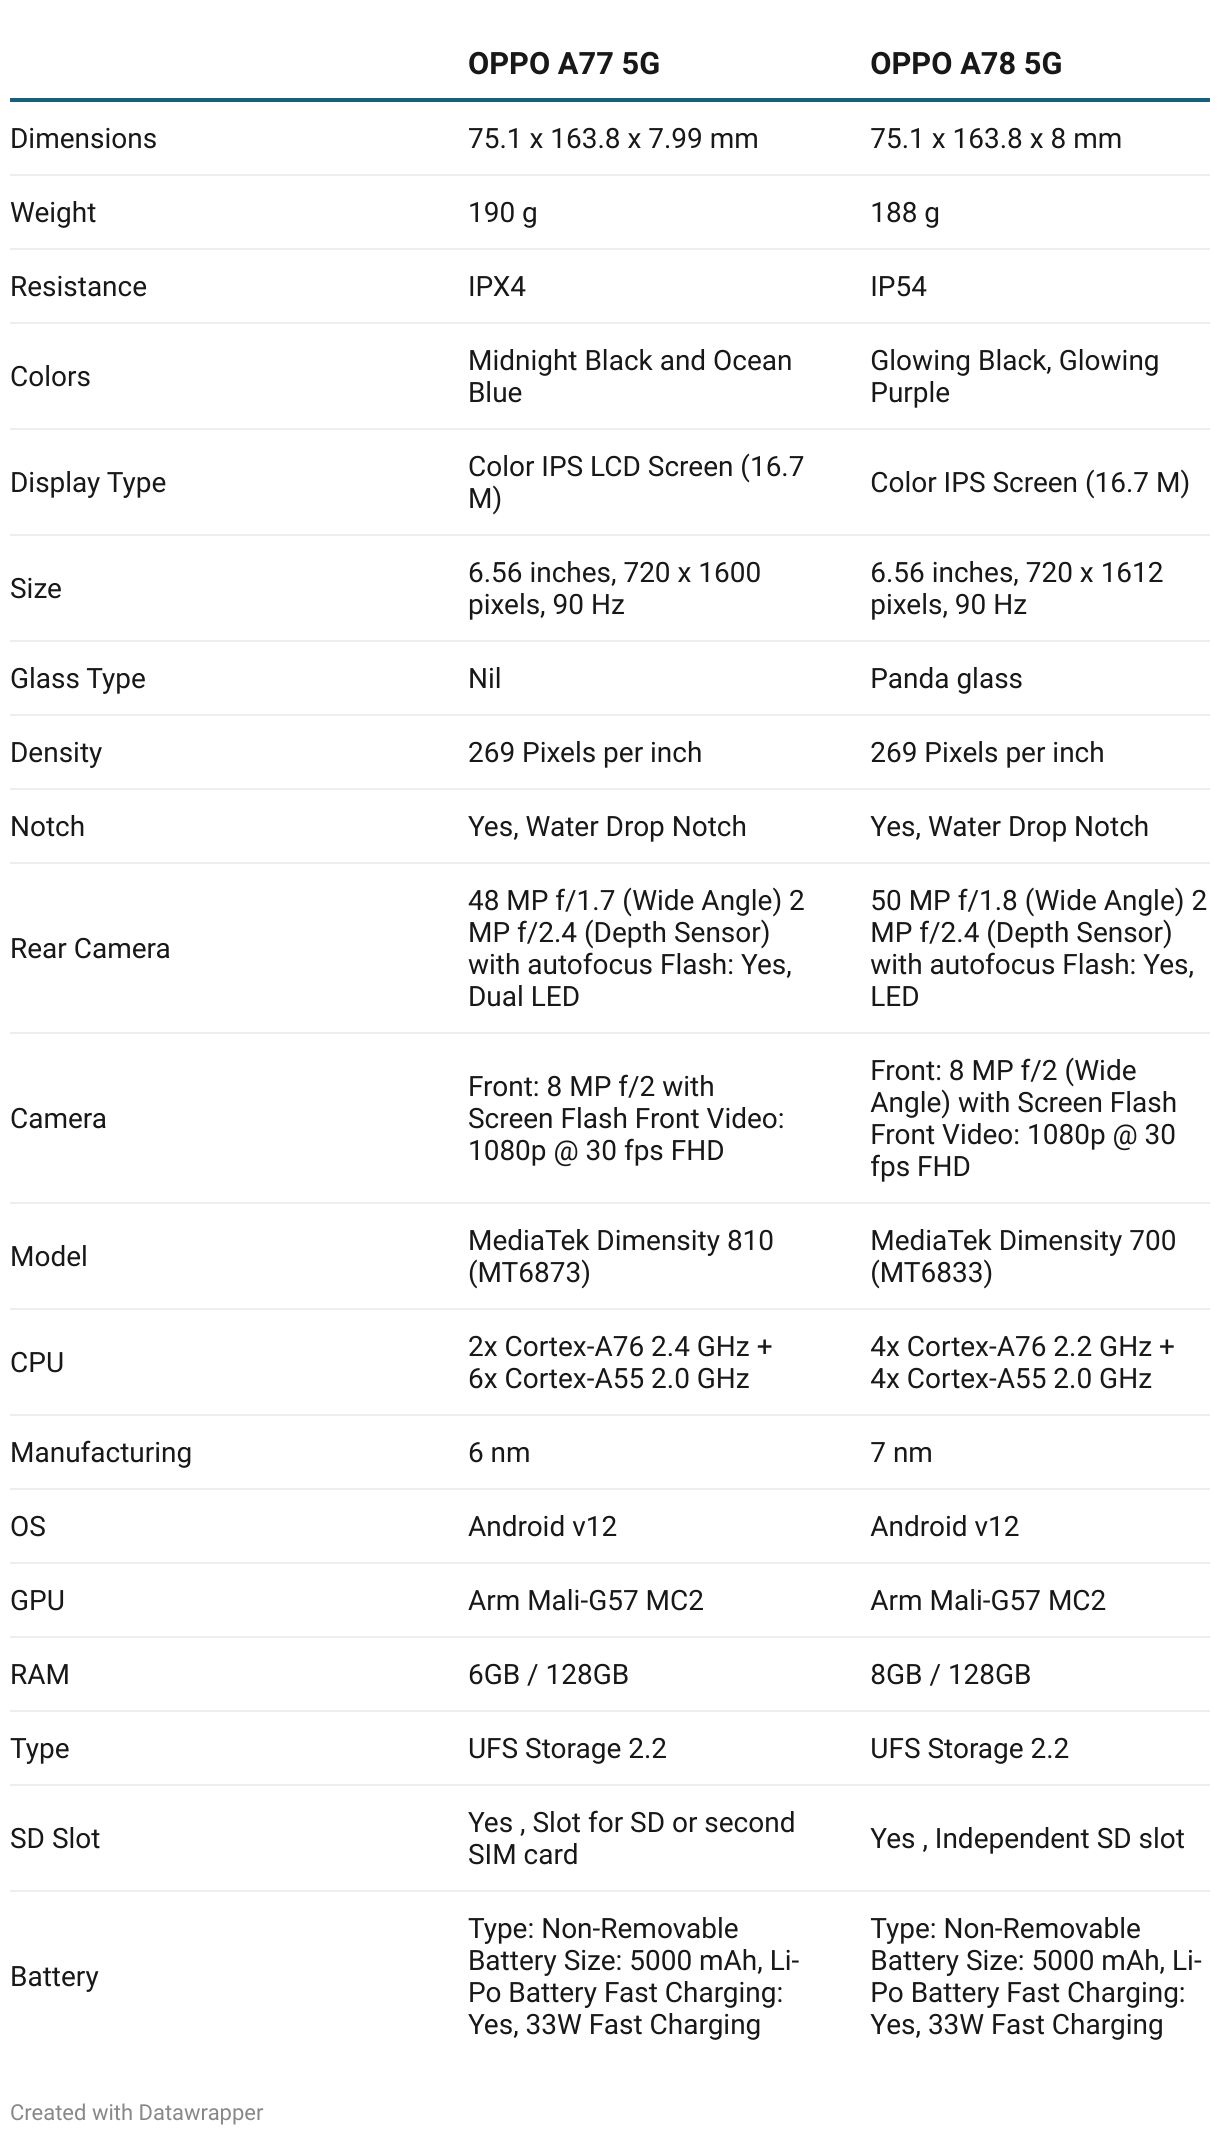 Specs Comparison Table for the OPPO A77 5G against the OPPO A78 5G.